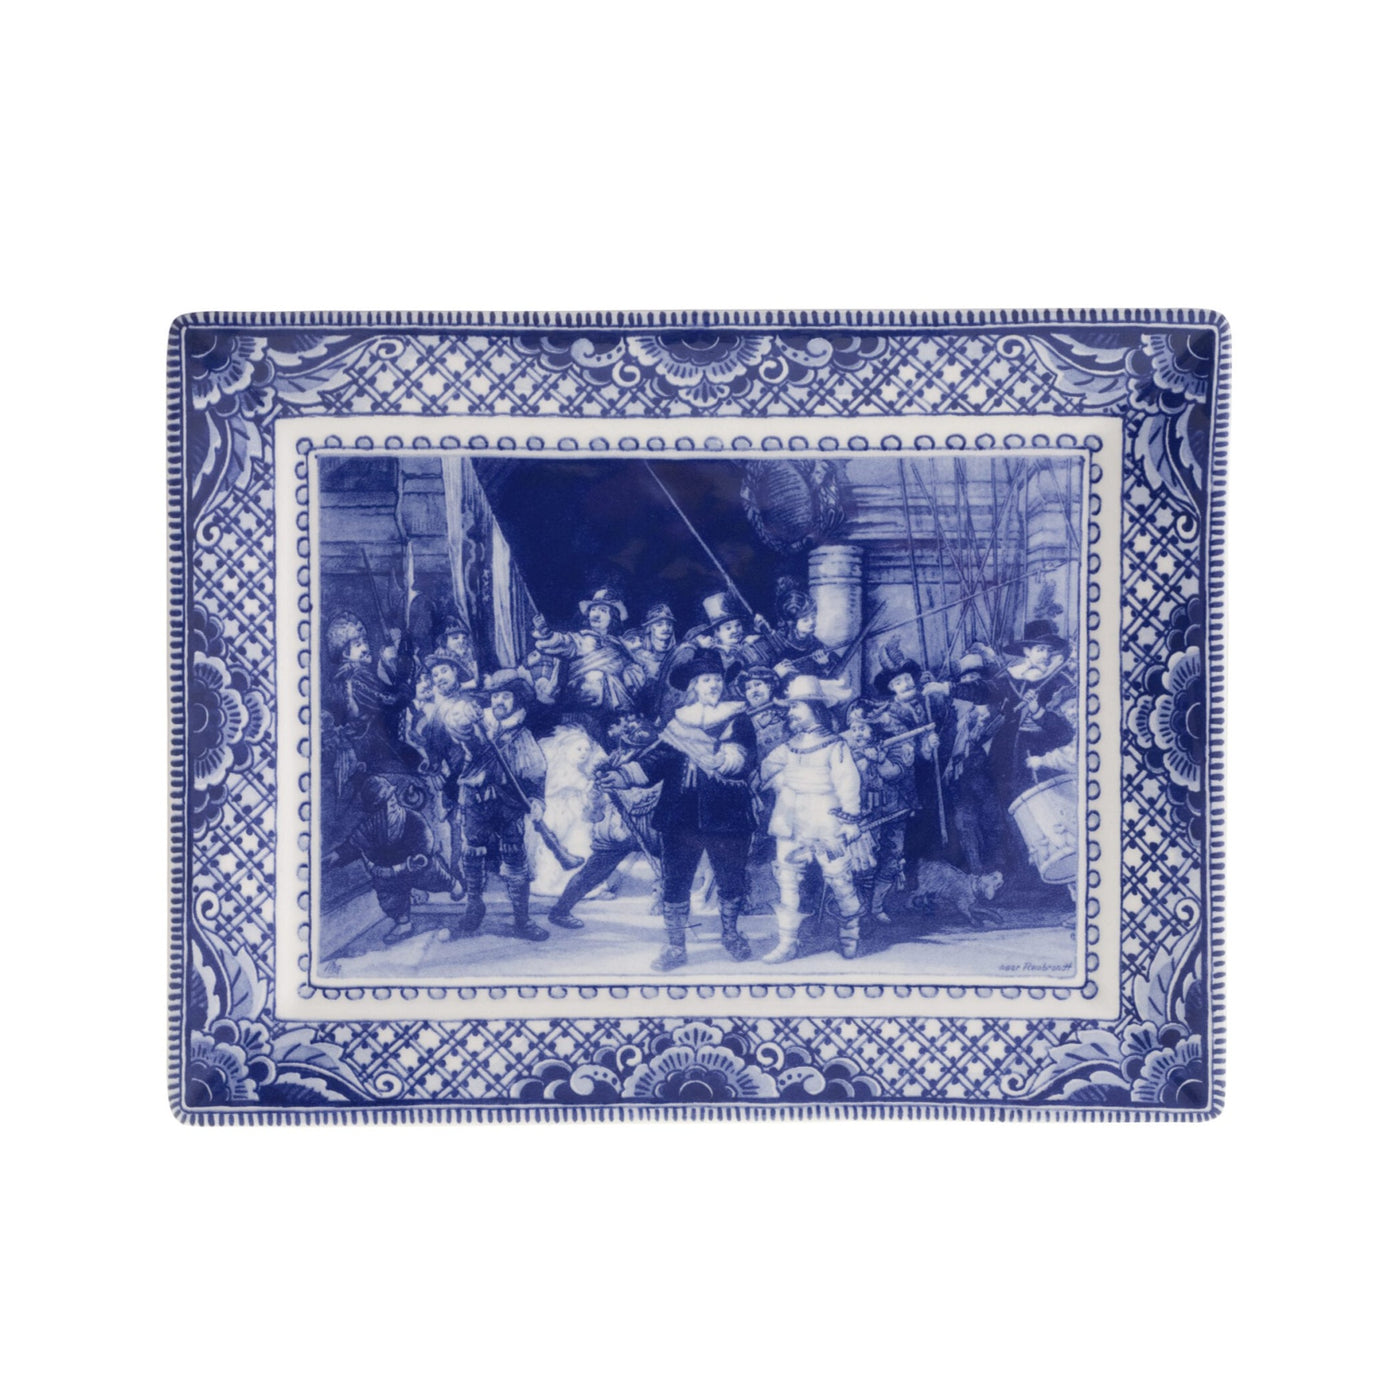 Night Watch Decorative Plate by Royal Delft